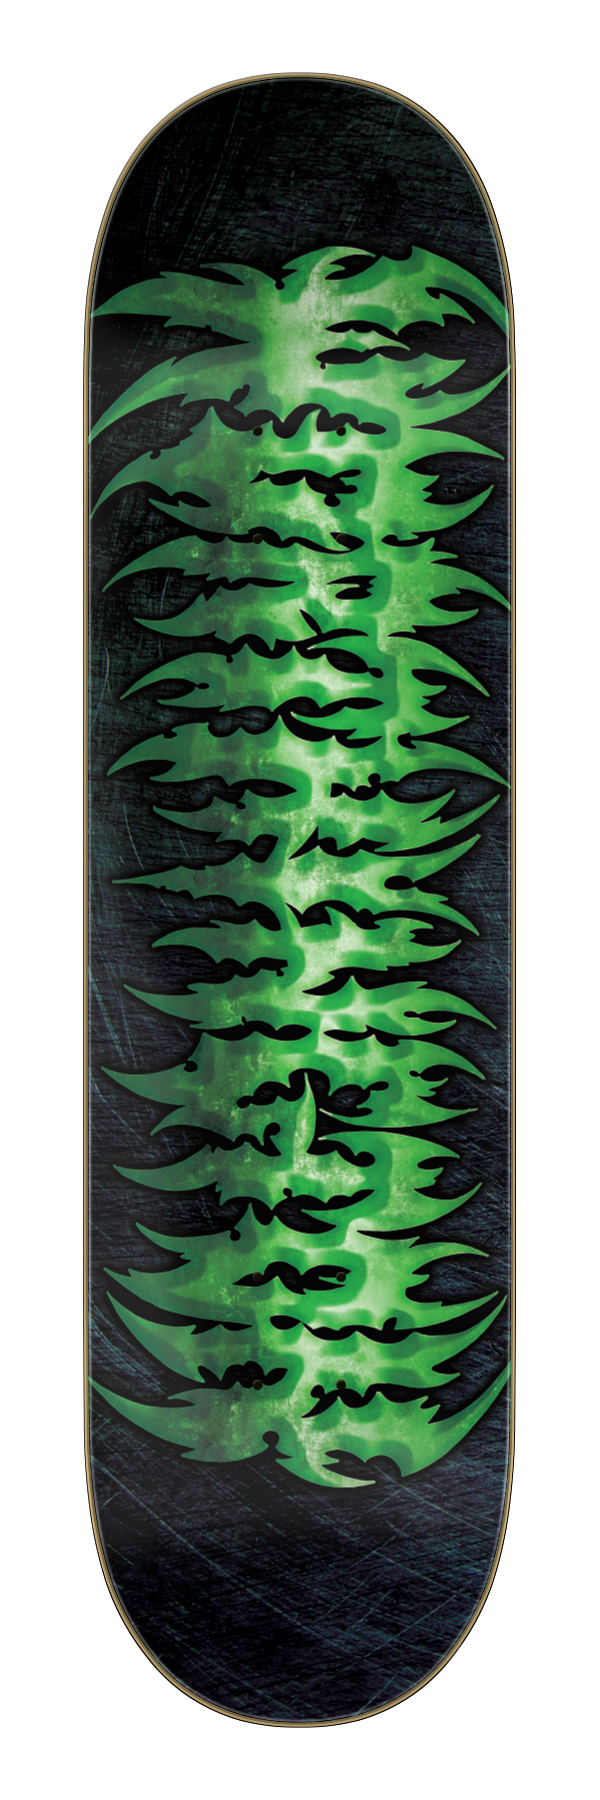 Worthington Black Out Pro Skateboard Deck 8.25in x 32.04in Creature